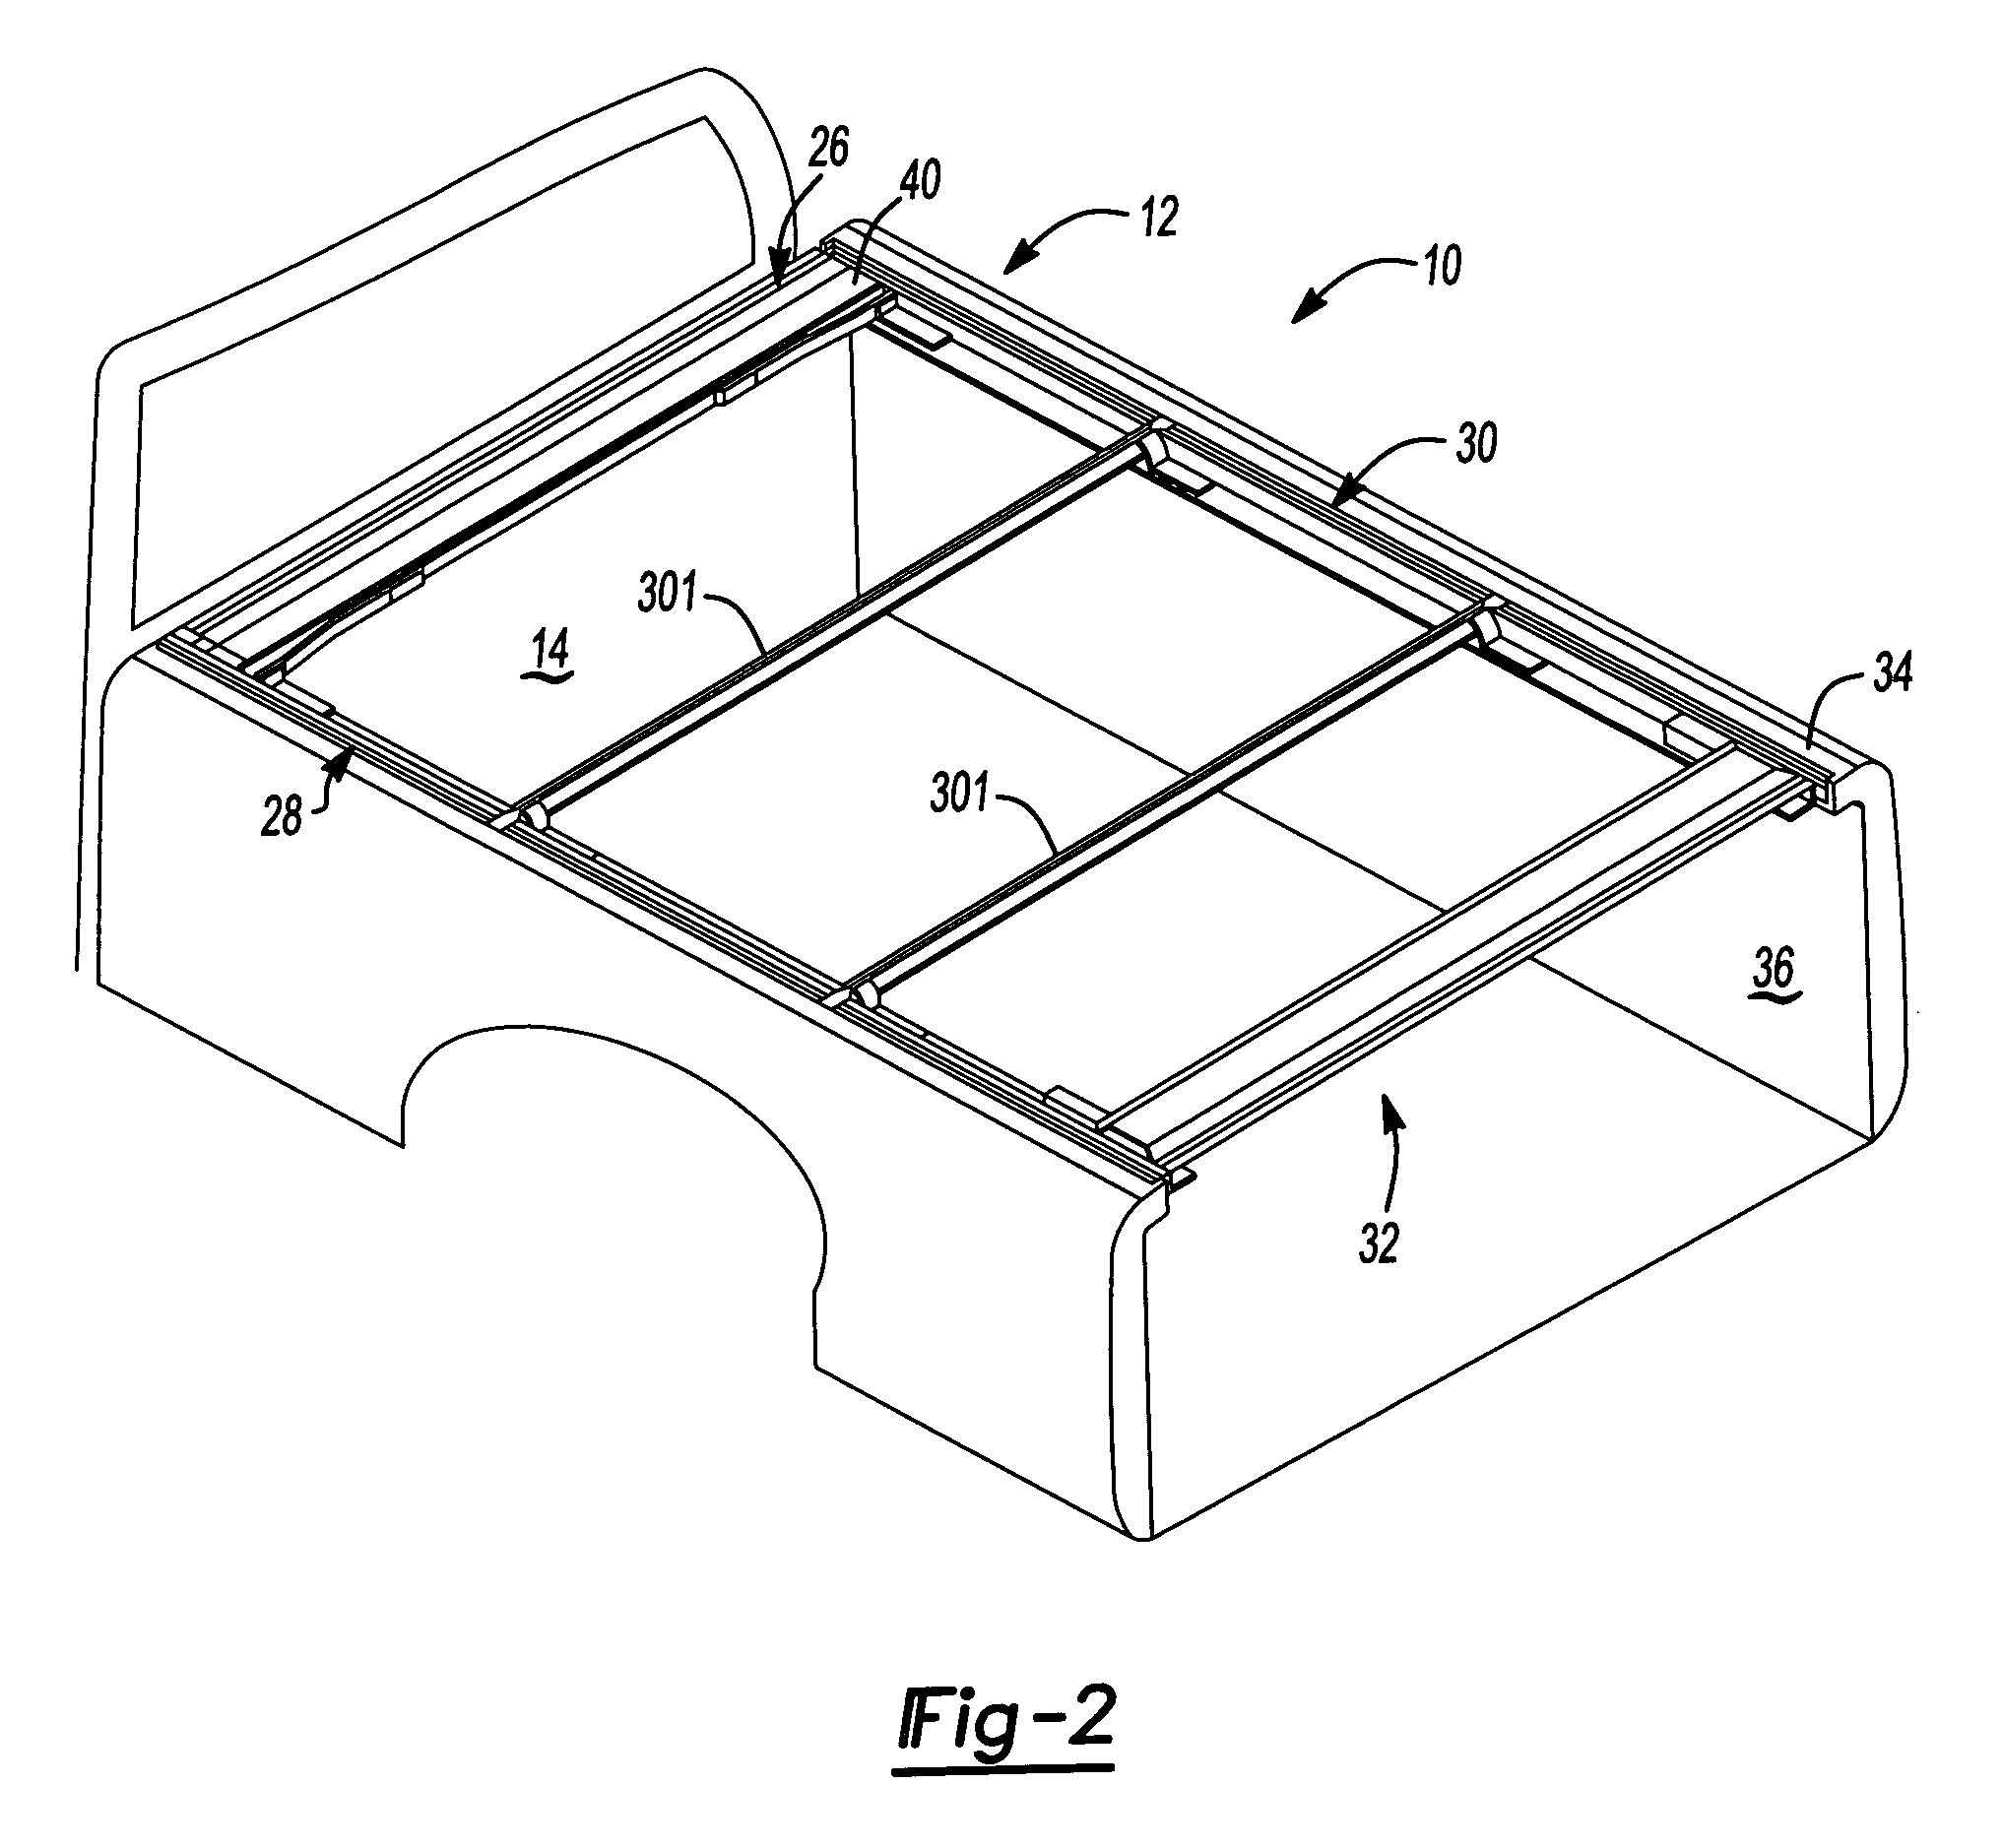 Covering structure having automatic coupling system